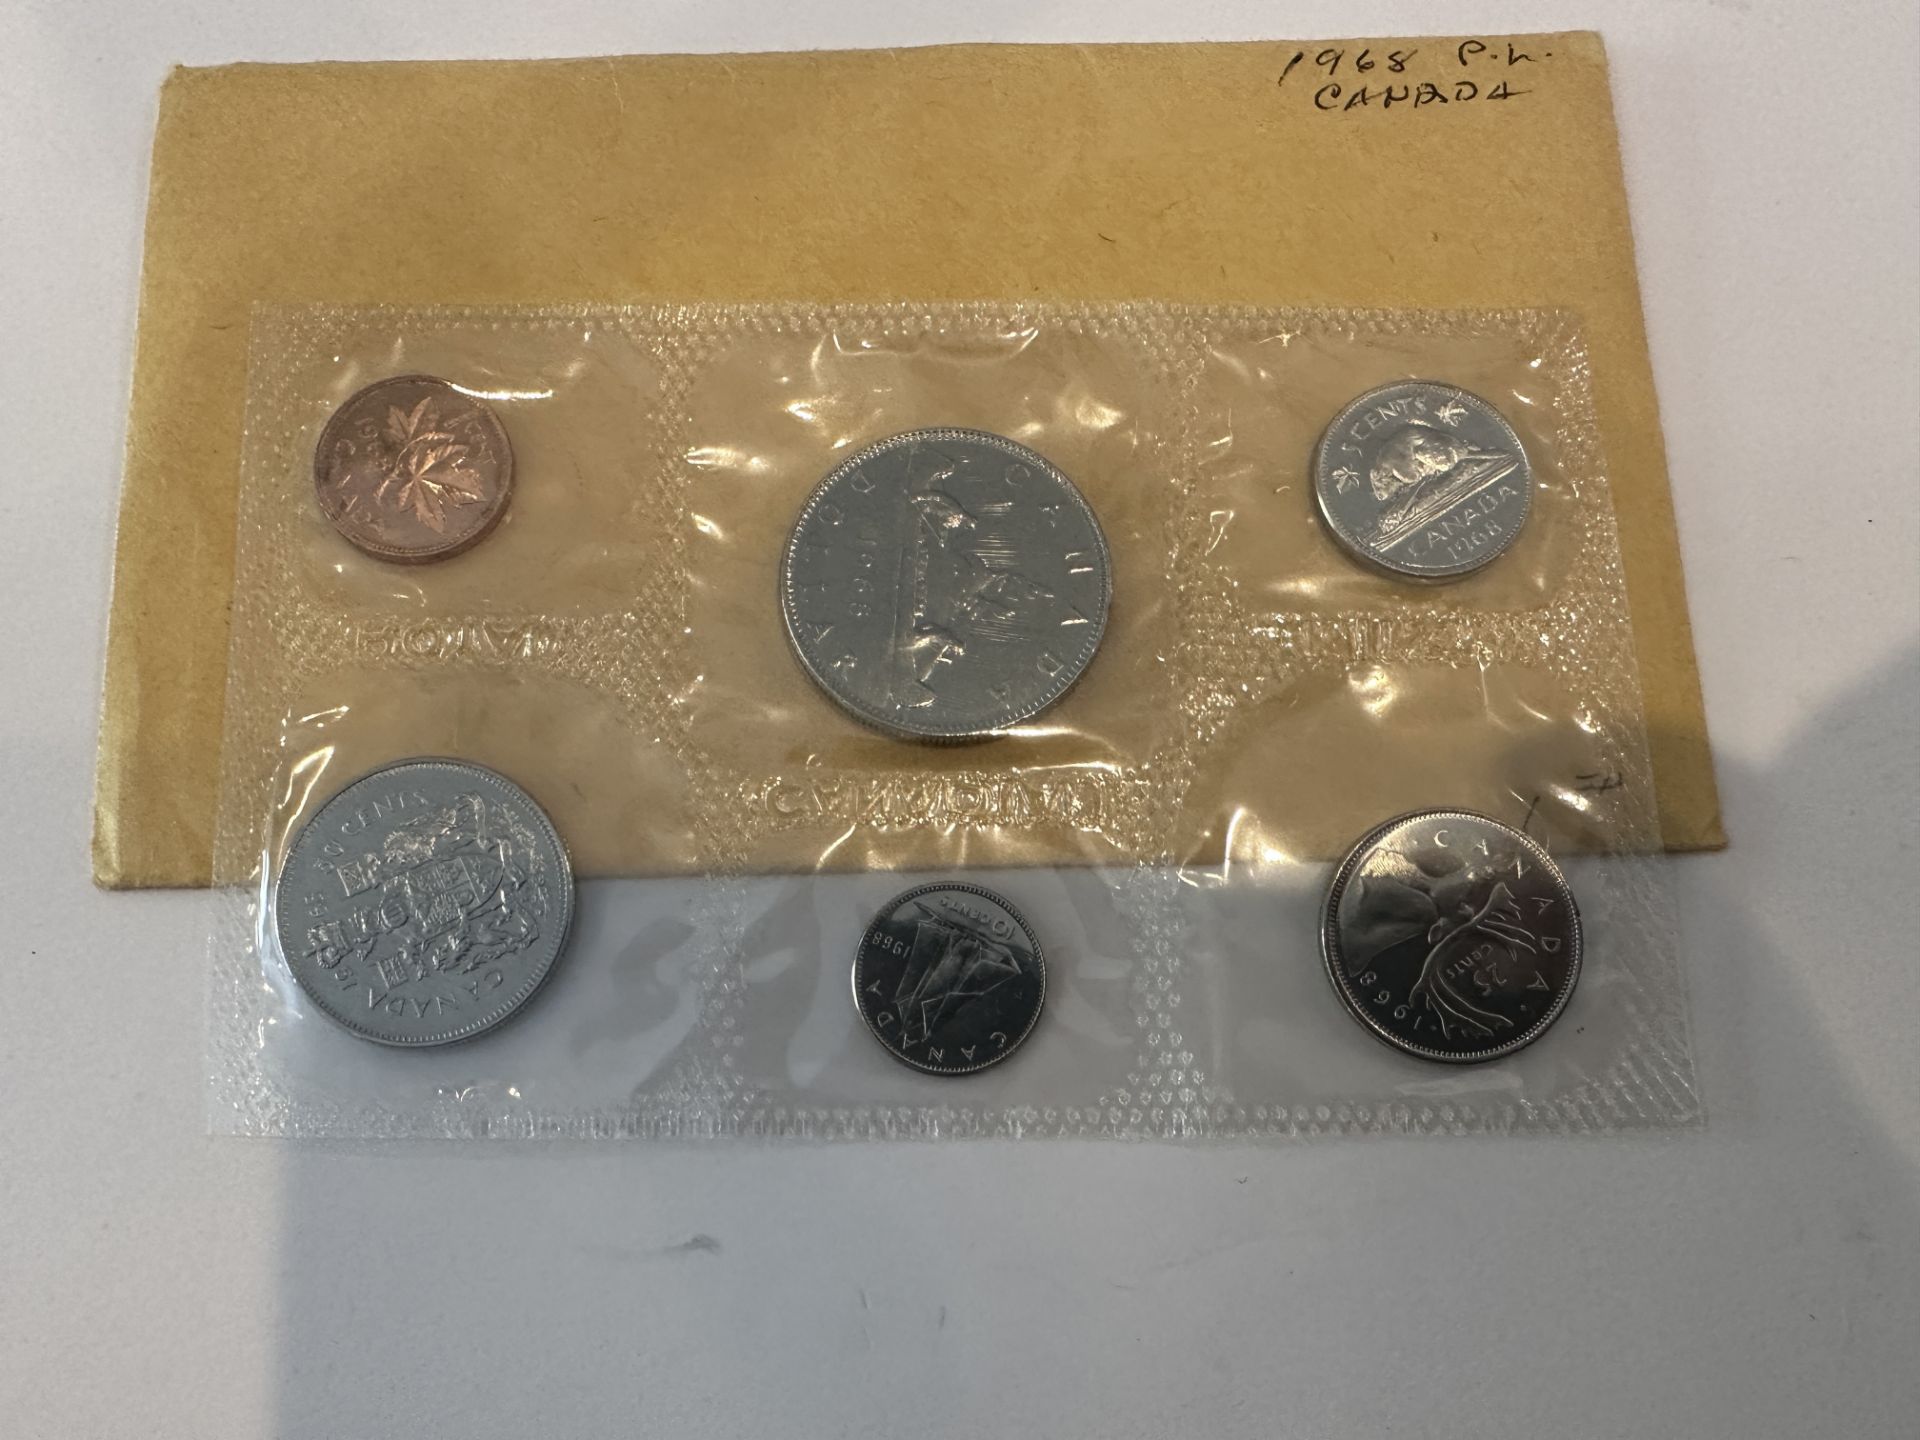 CANADIAN MINT COIN PROOF SET , DATE INDICATED IN PHOTOS